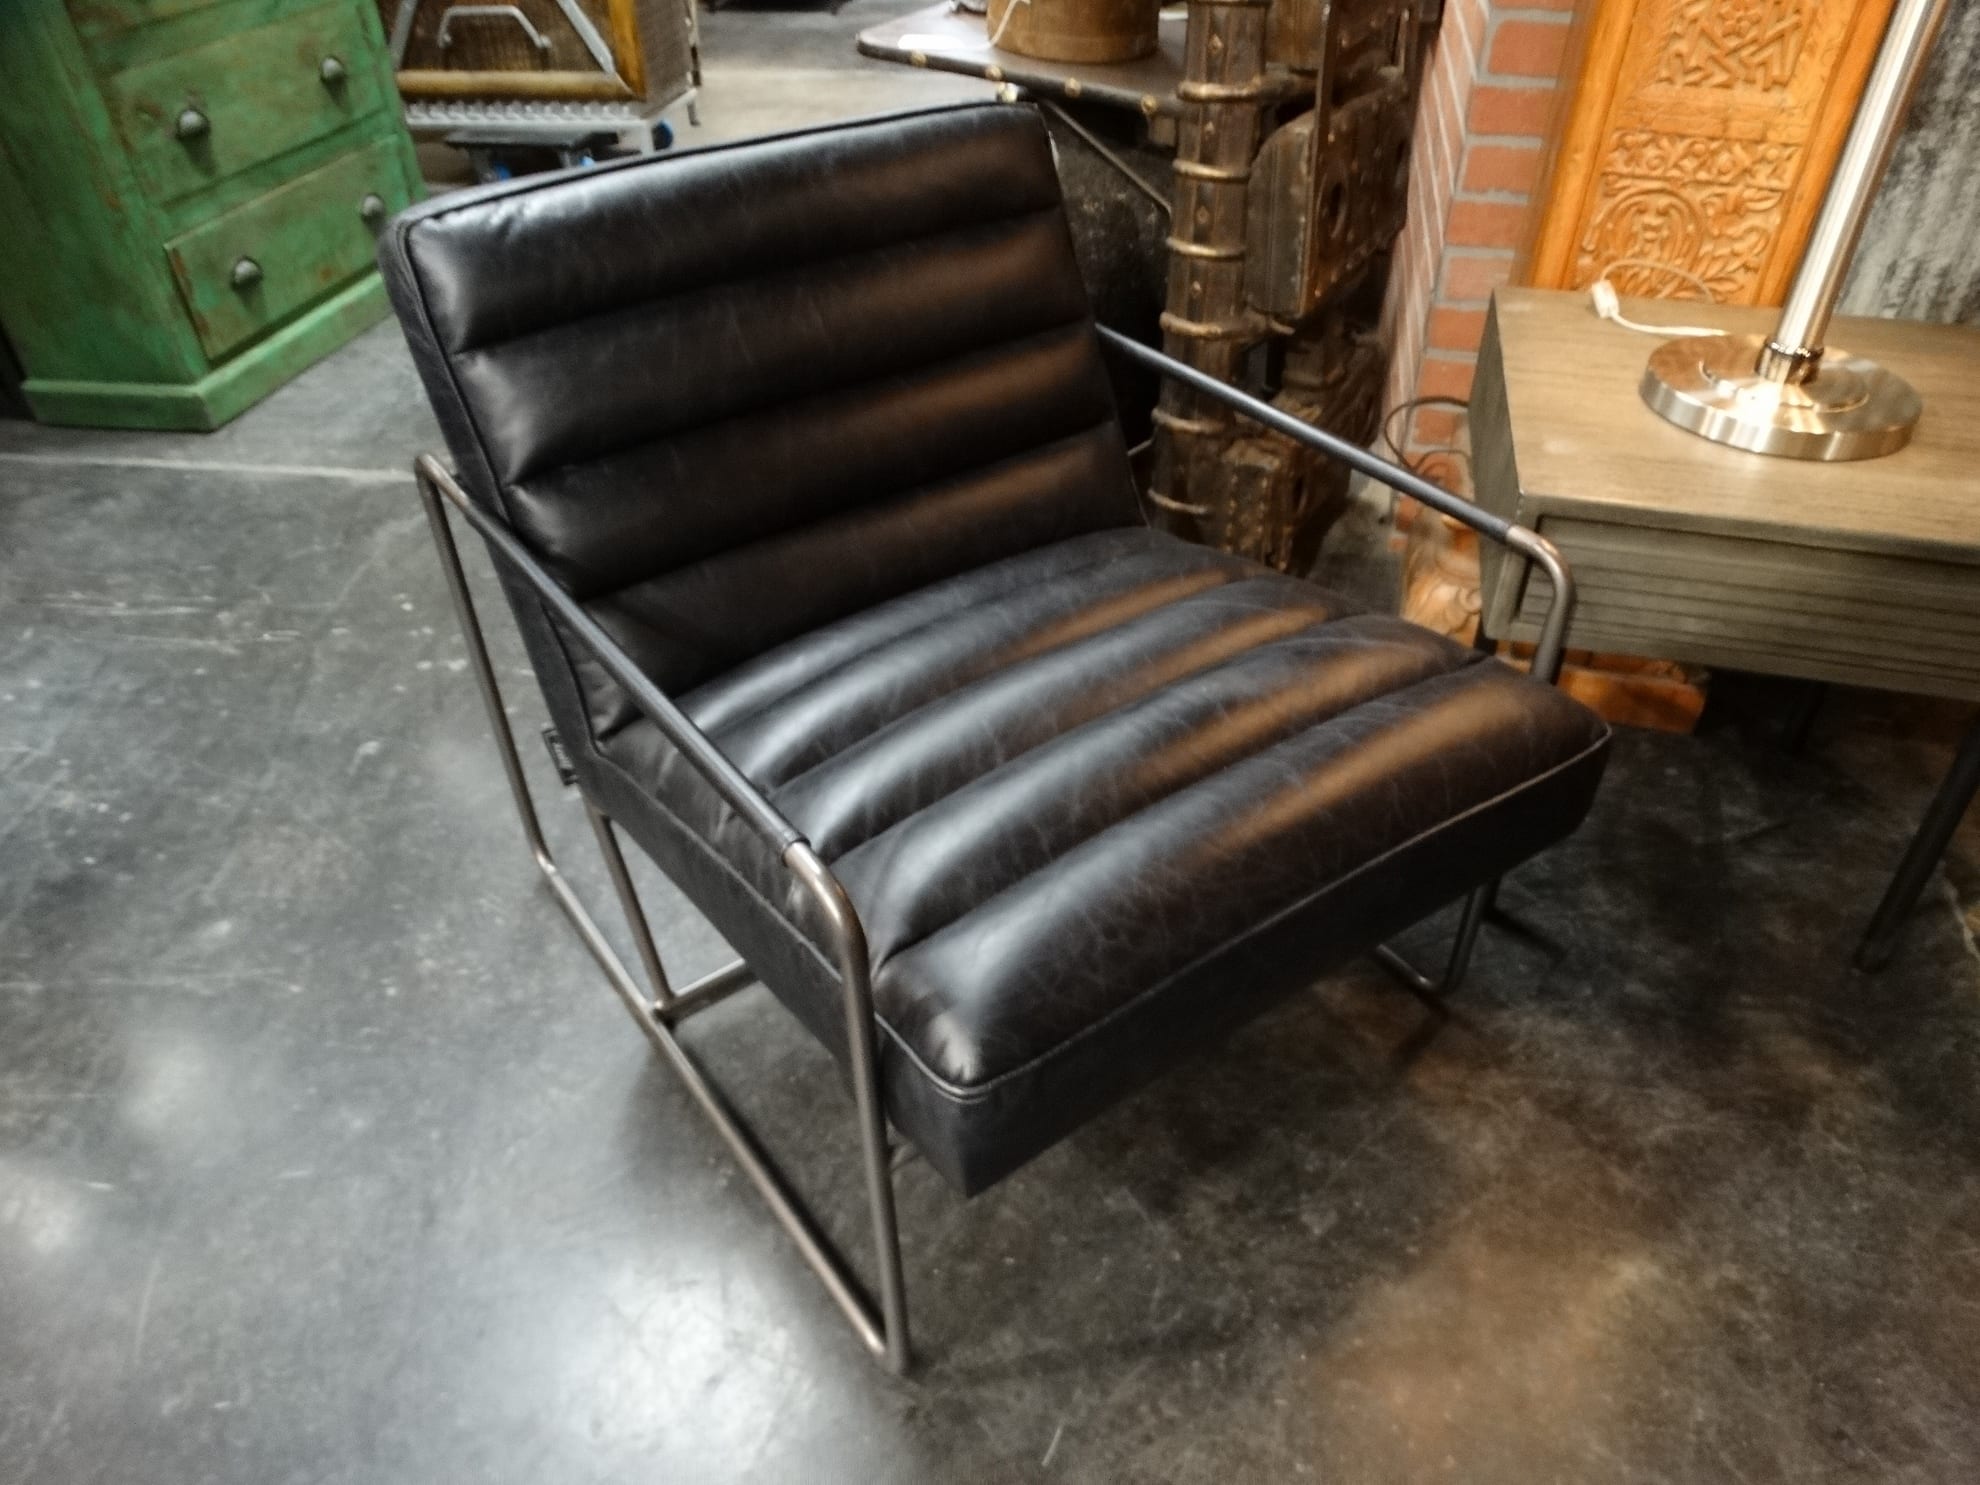 Elegant Black Leather Chair Is Roomy And Has A Classic Flair